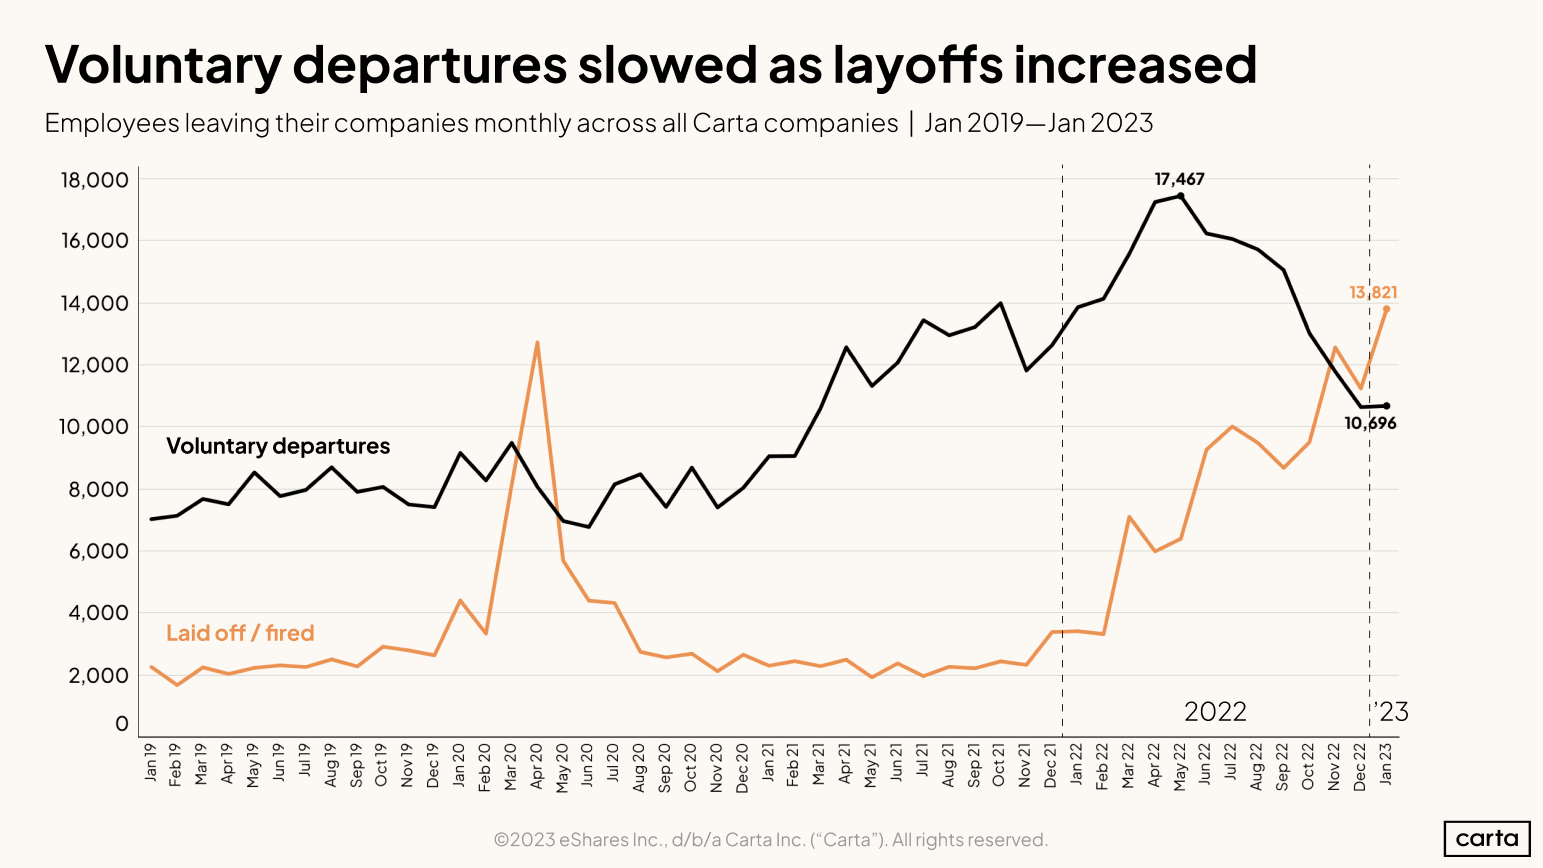 Employees leaving their companies monthly across all Carta companies, Jan 2019-Jan 2023